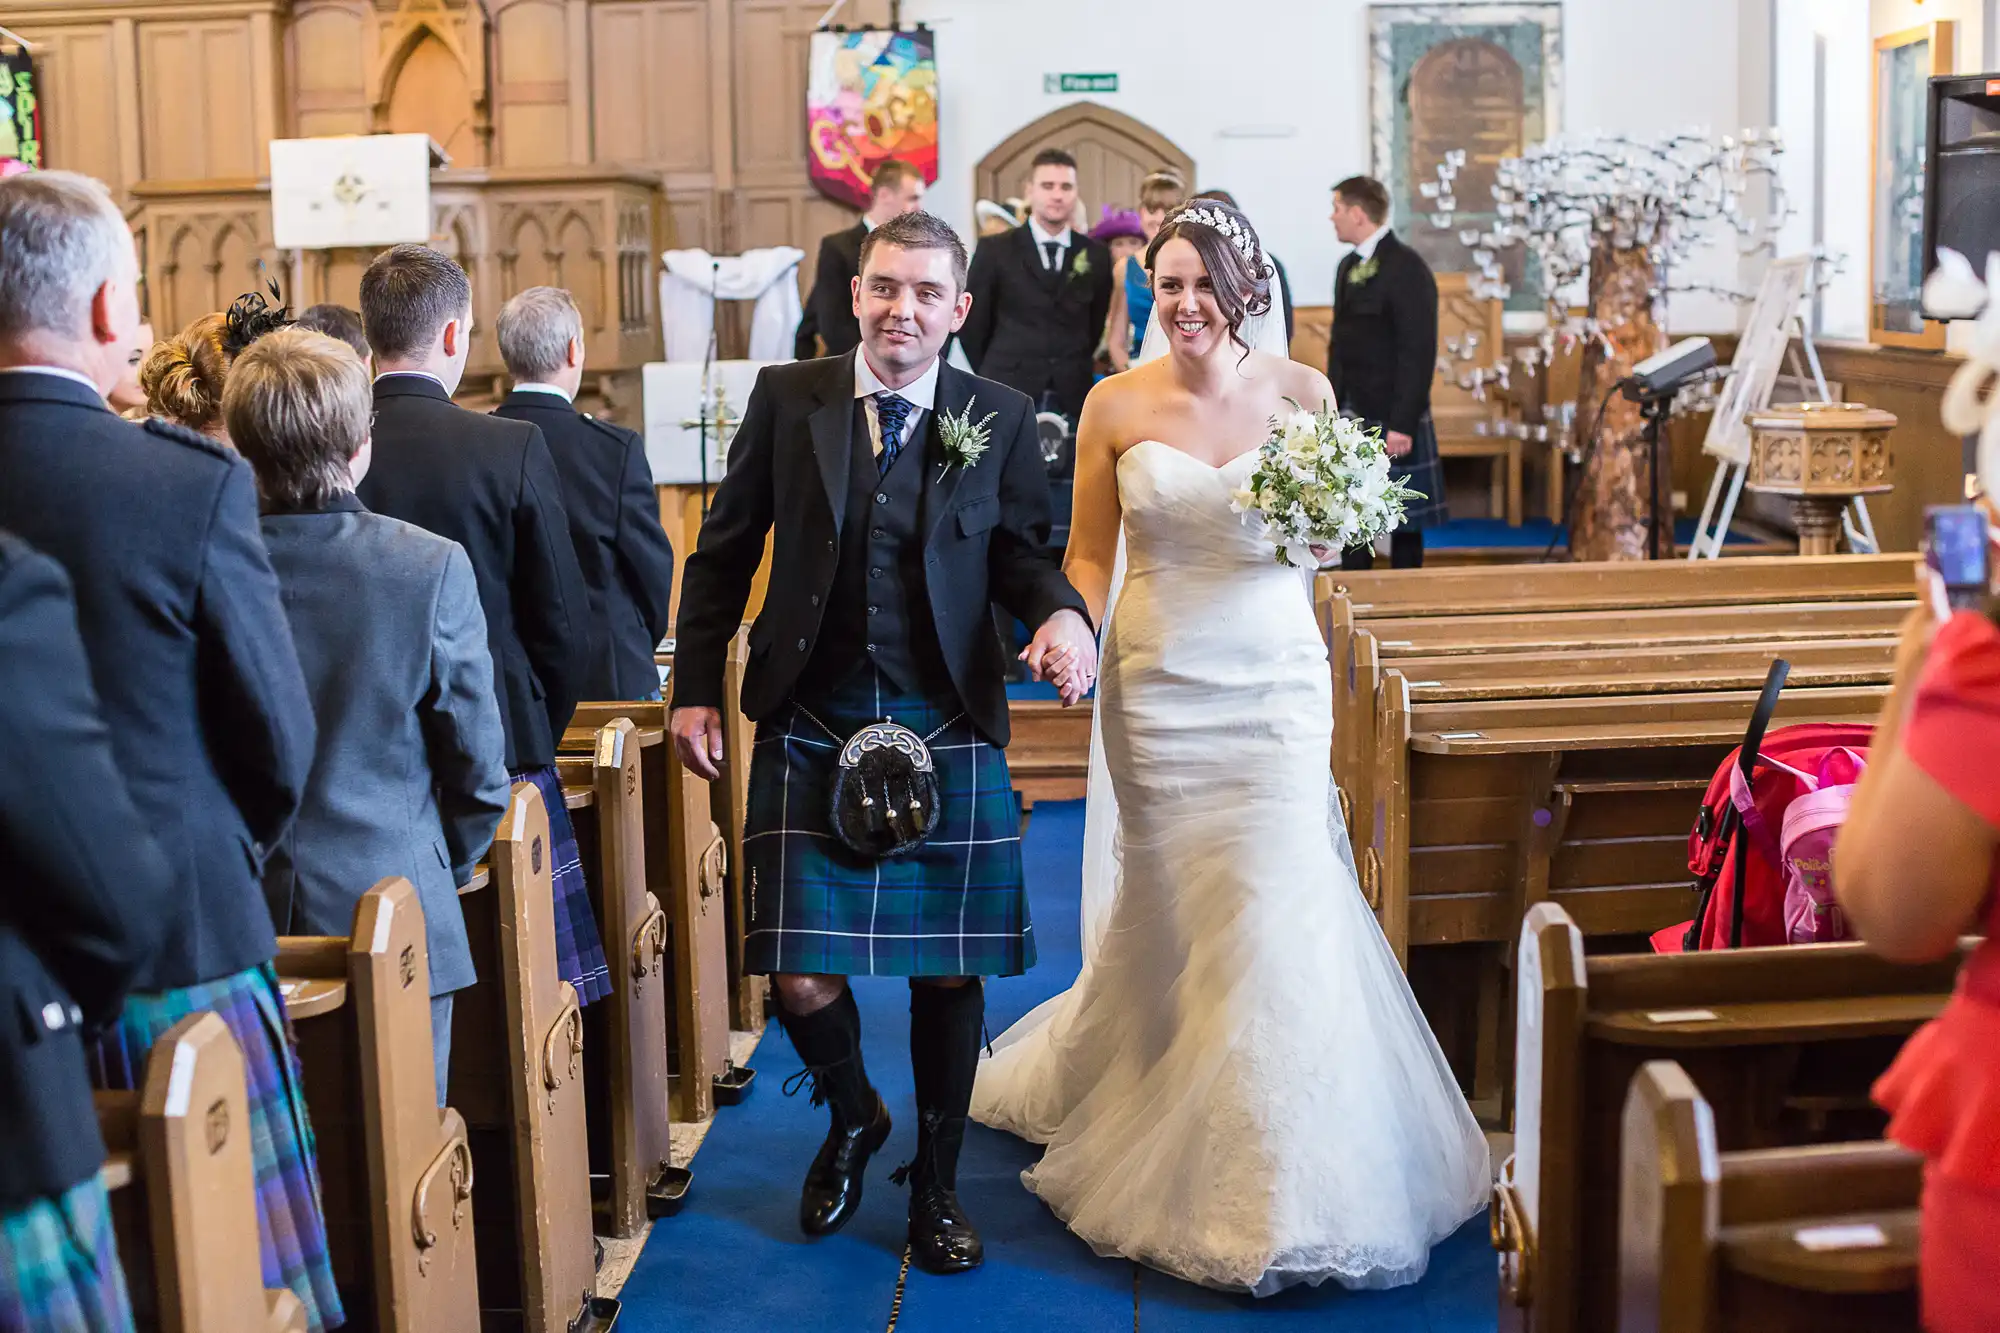 A bride in a white dress and a groom in a kilt walk down the aisle of a church, smiling, as guests look on.